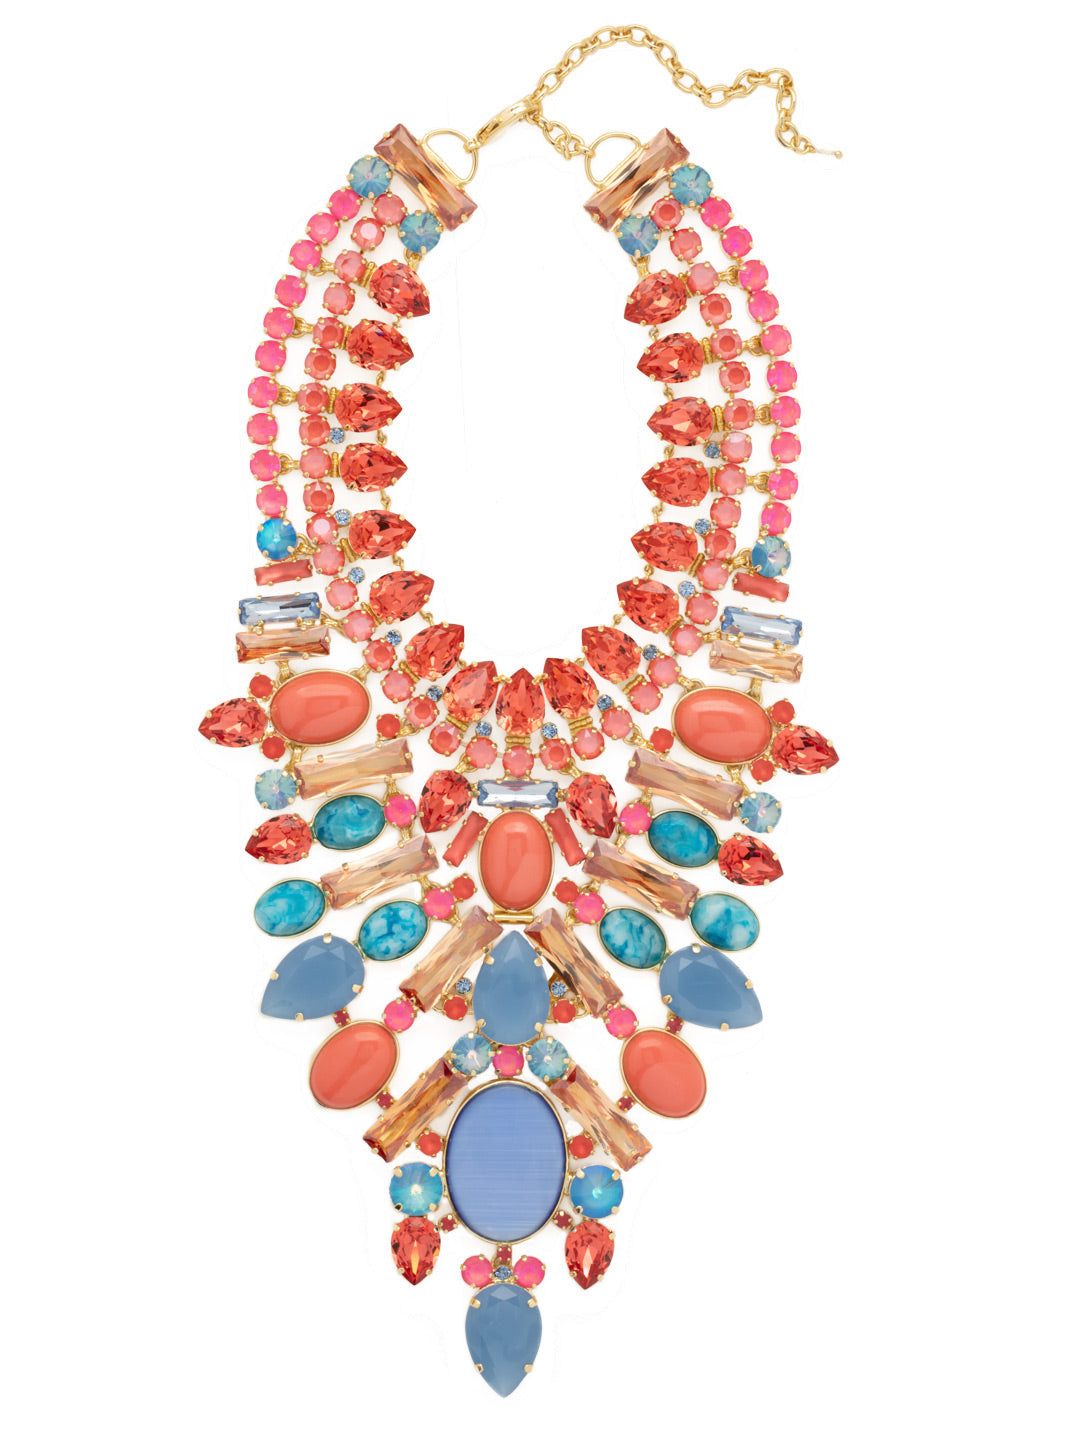 Crystal Cluster Statement Necklace - NSP80BGSOP - <p>A large cluster of unquie crystals creates an extrodianry statement necklace. The sparkle from the rows of crystals are eye-catching. From Sorrelli's South Pacific collection in our Bright Gold-tone finish.</p>